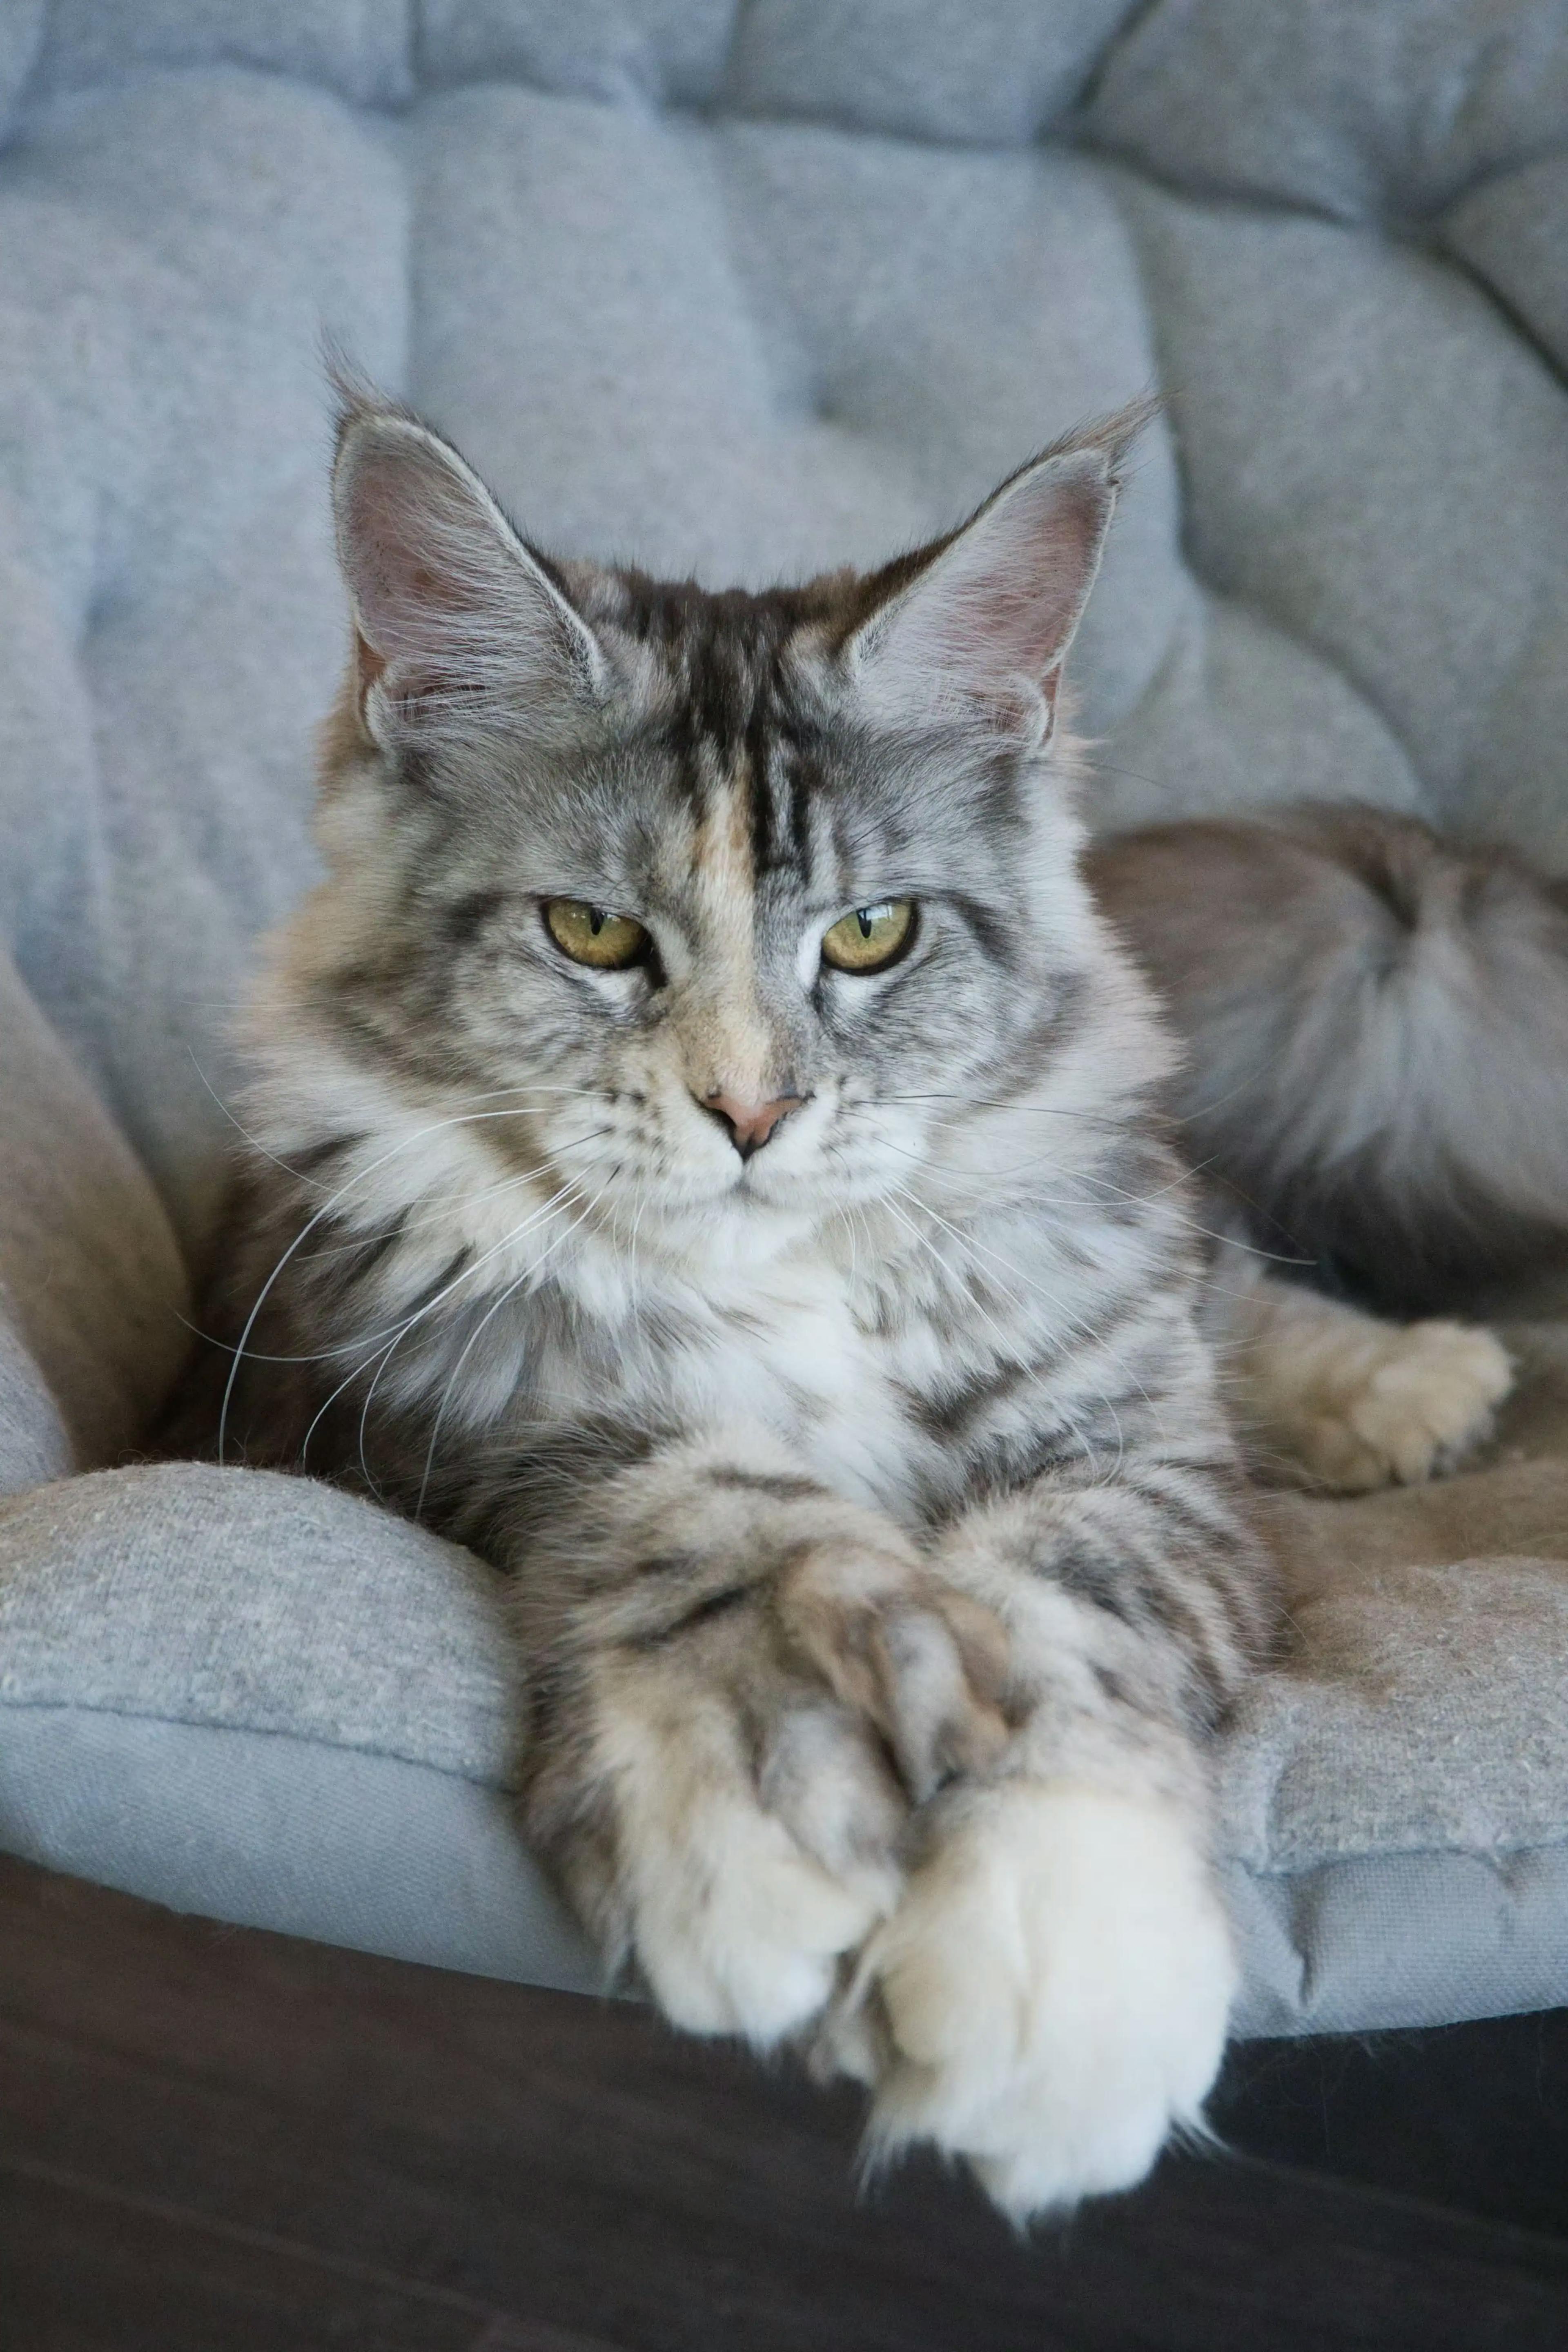 queen-aphrodite-of-slow-blink-maine-coons--ems-code-pol-fs-25--maine-coon-female-adult-cat-3